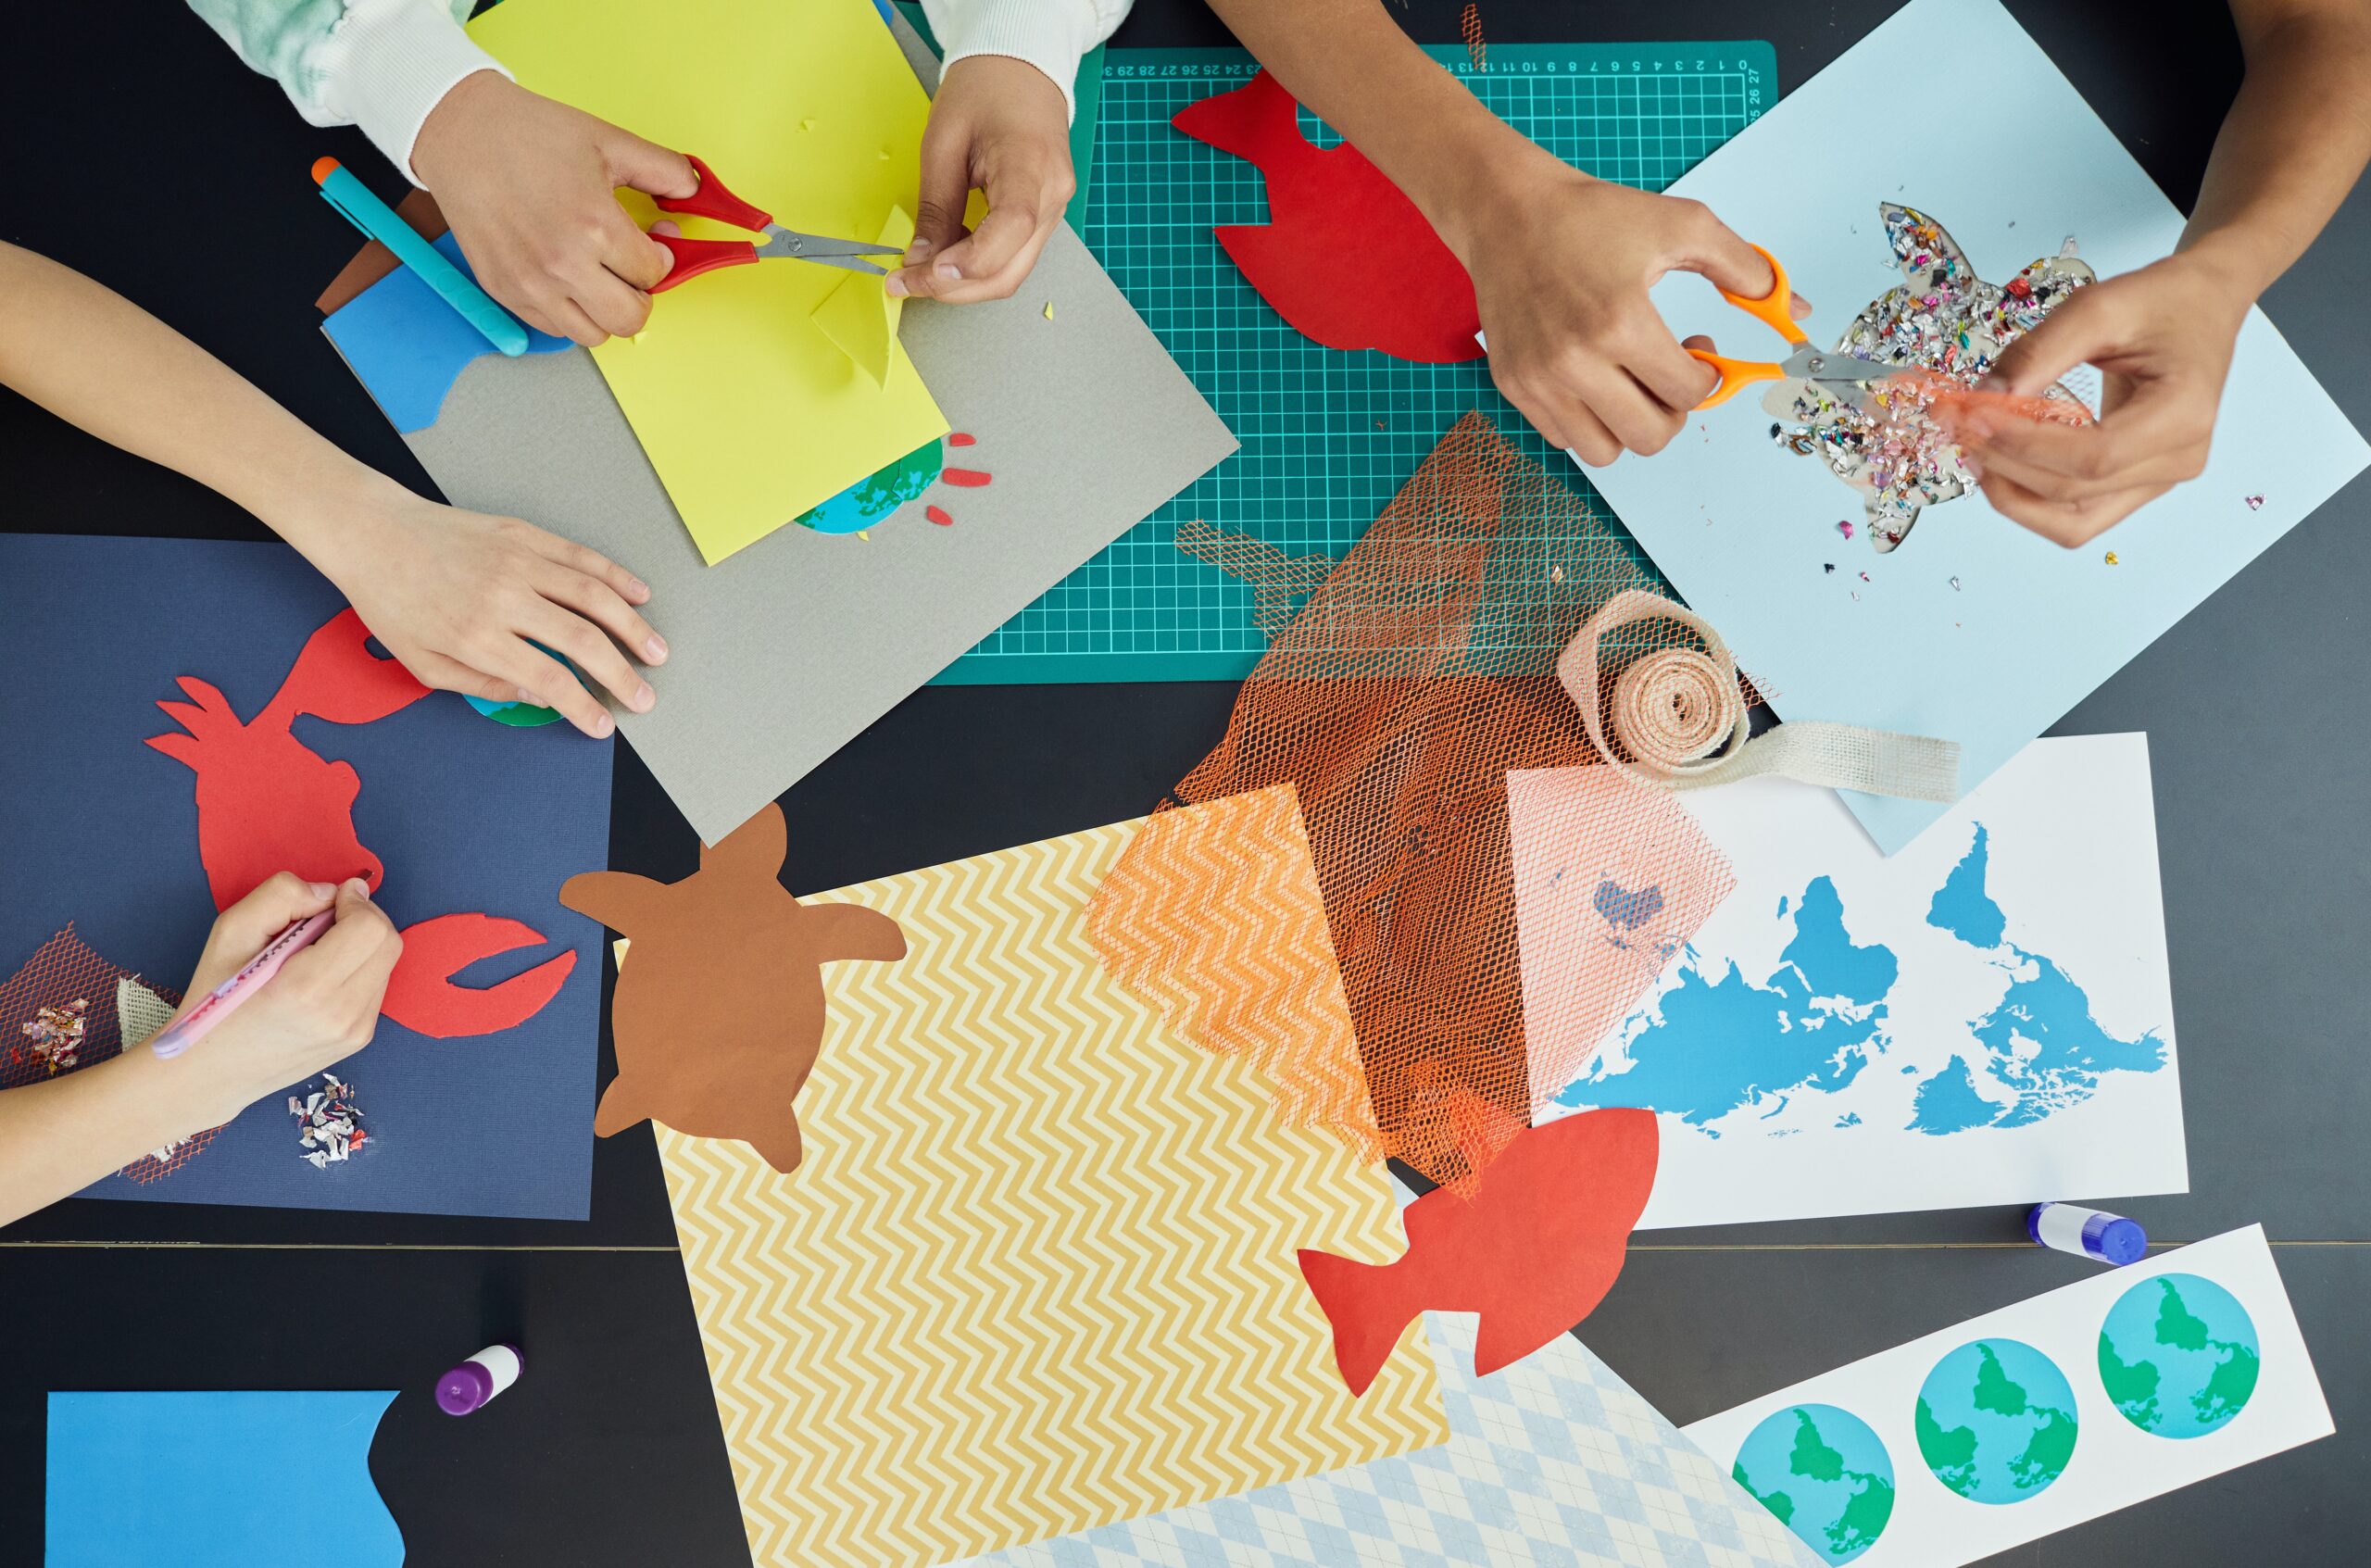 Discover How Craft Games Are Inspiring Children to Identify Themselves Through Art